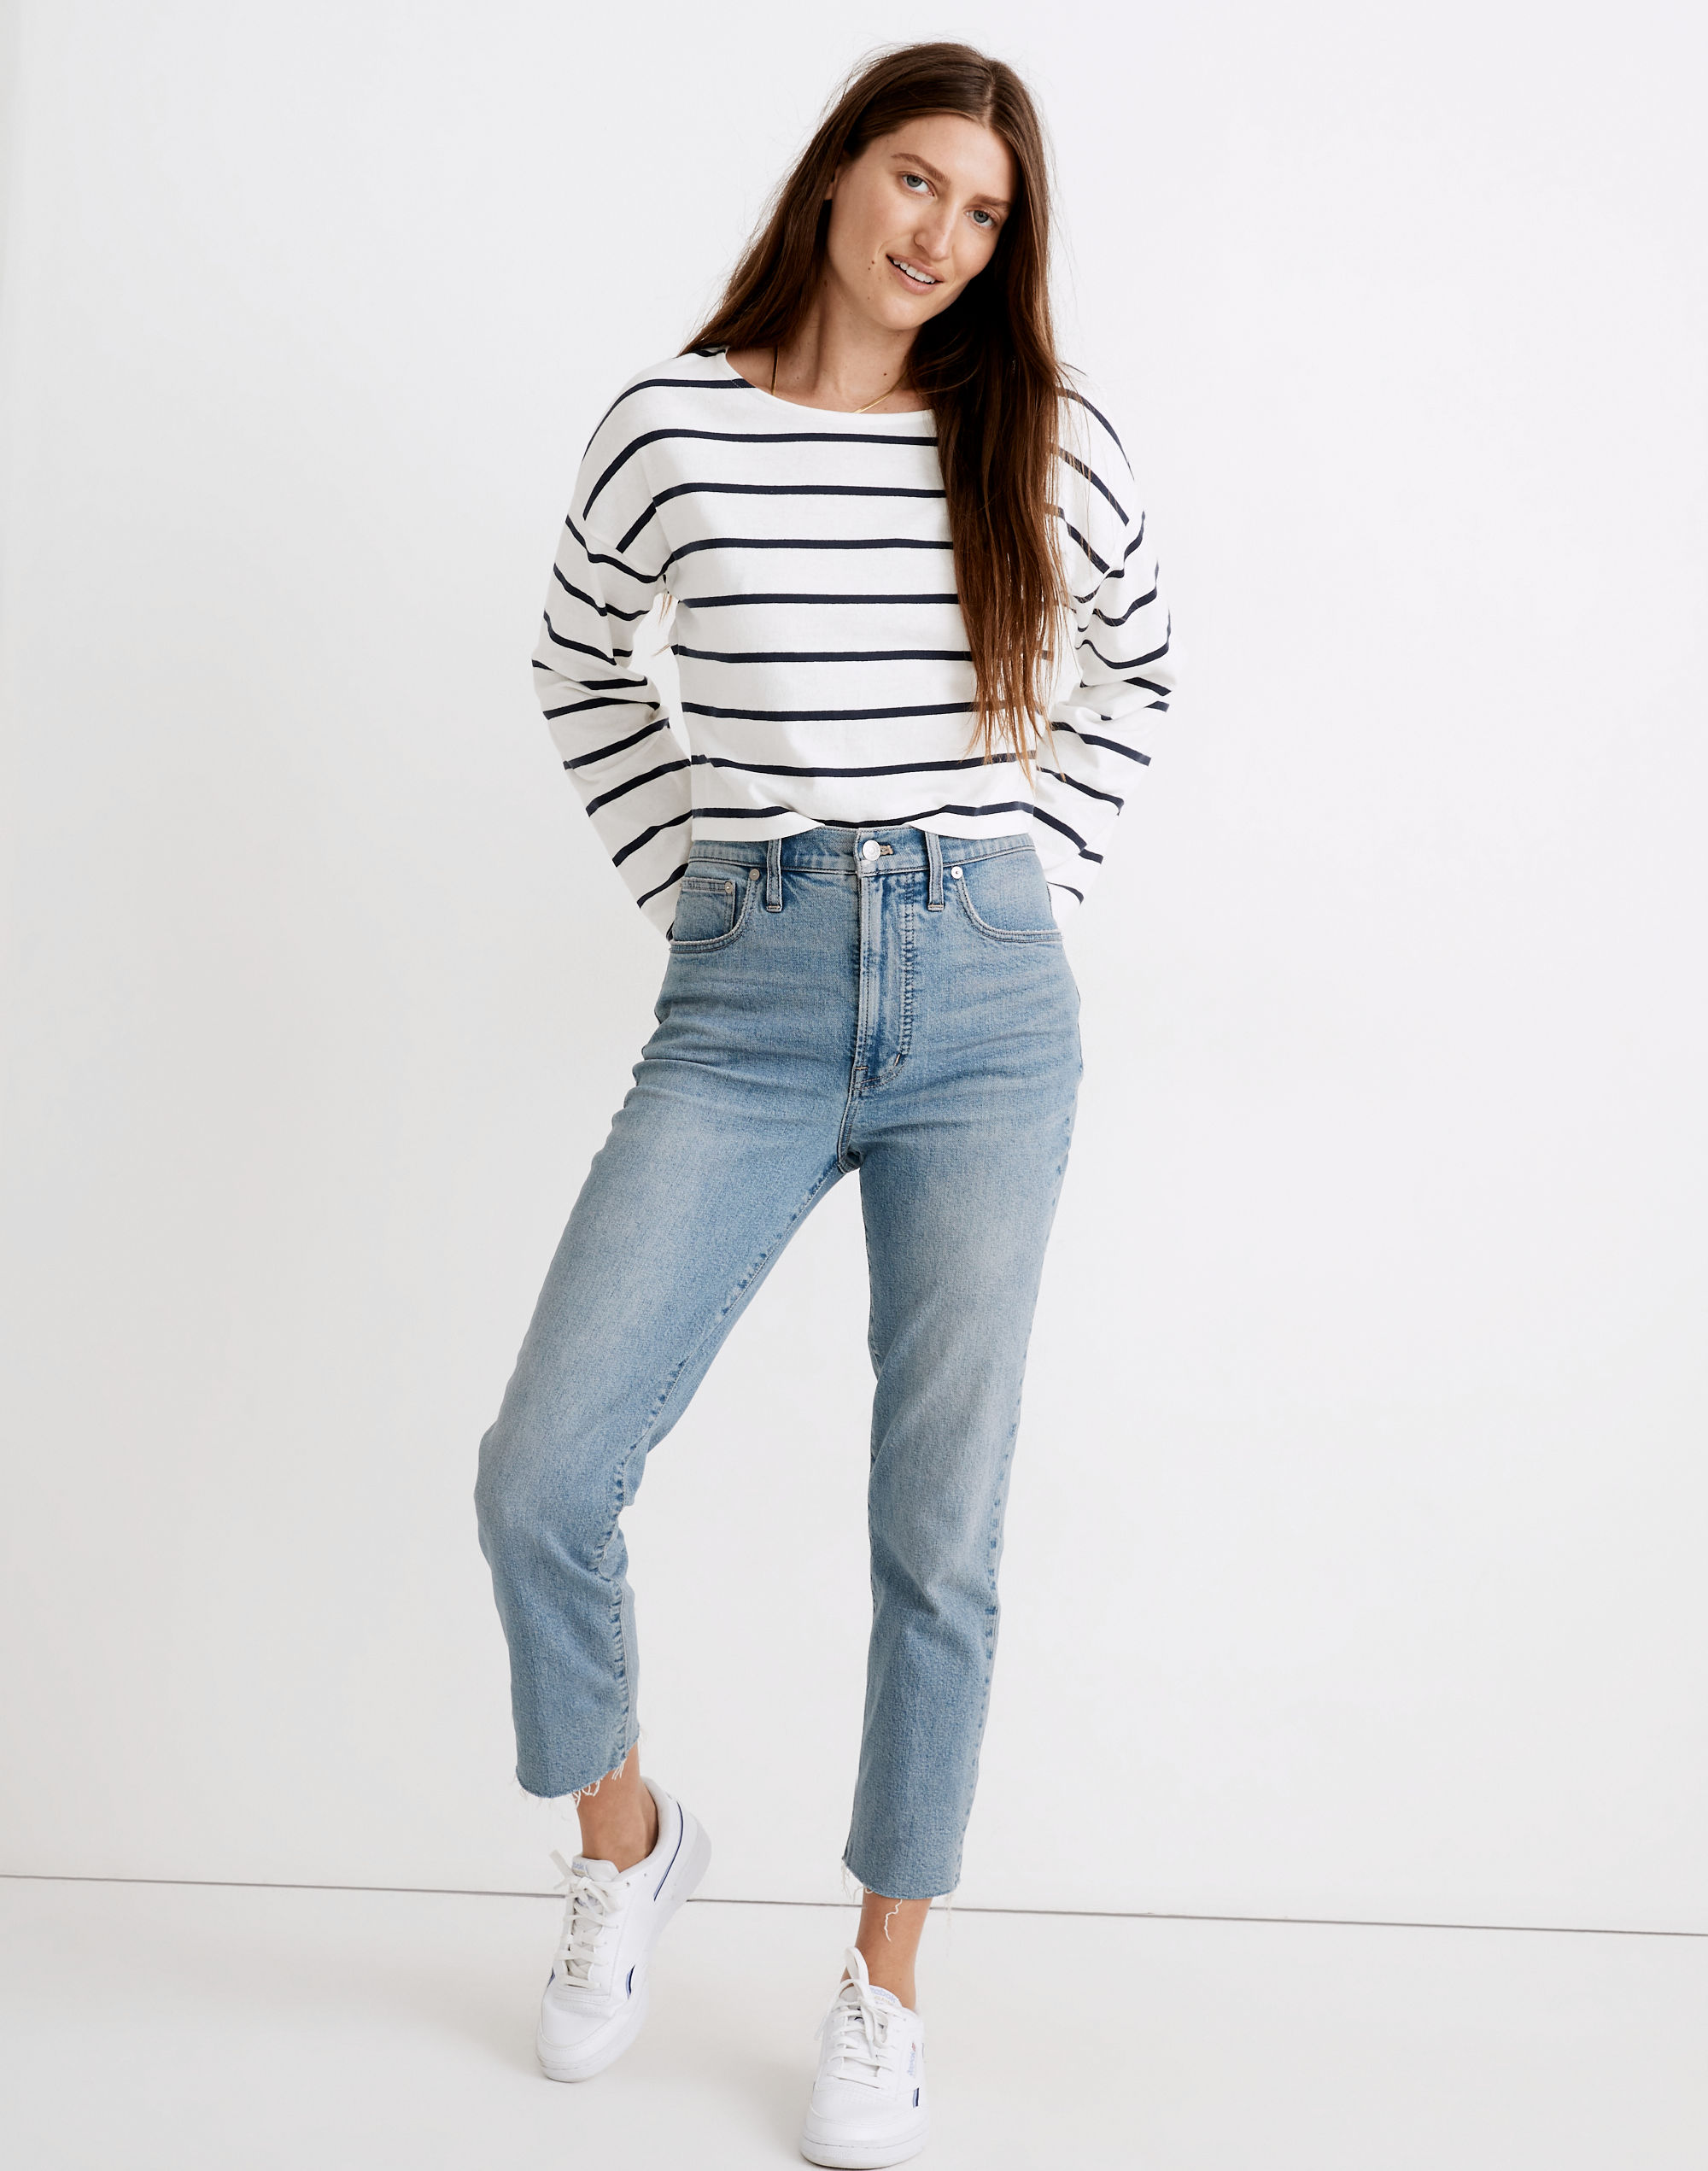 The Petite Perfect Vintage Straight Jean in Kingsbury Wash: Knee-Rip Edition